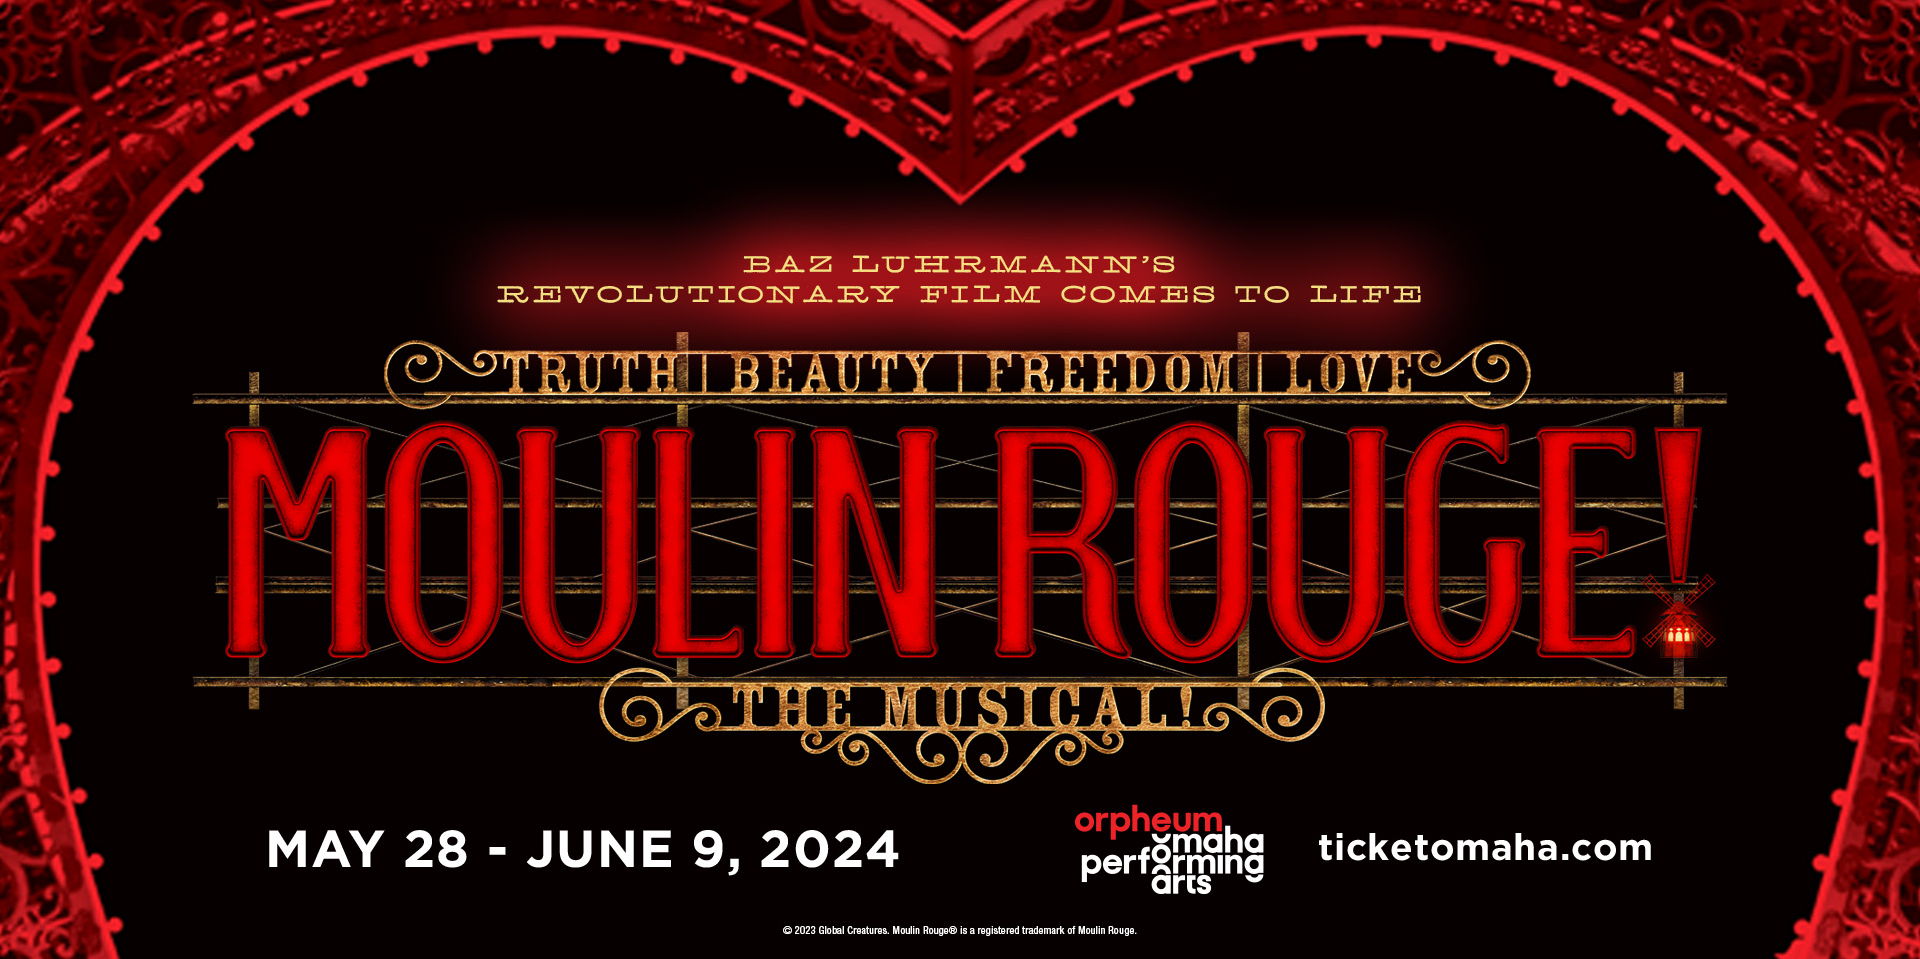 MOULIN ROUGE! THE MUSICAL promotional image